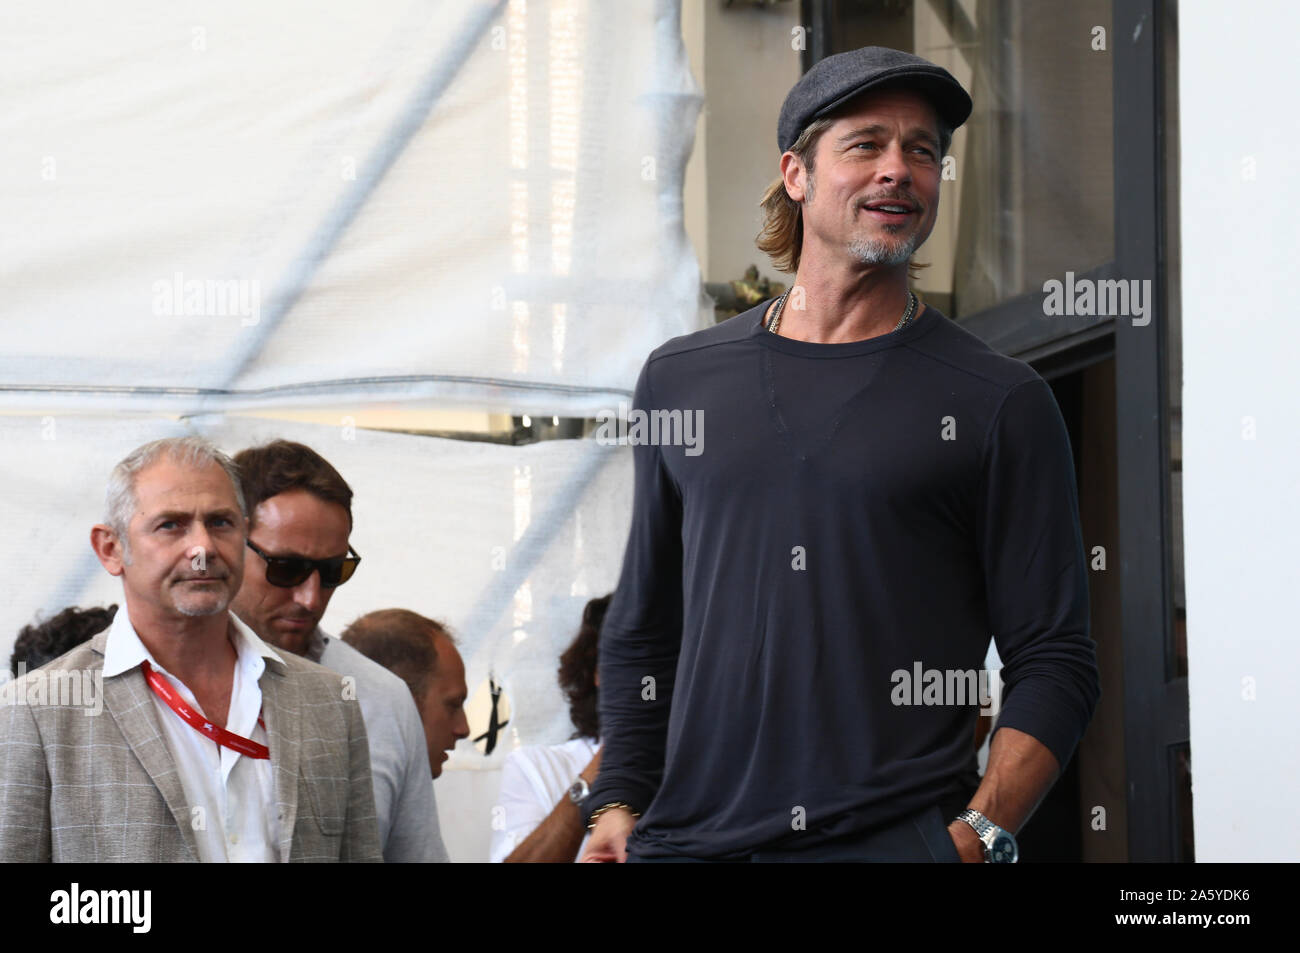 VENICE, ITALY - AUGUST 29,2019: Brad Pitt attends 'Ad Astra' photocall during the 76th Venice Film Festival on August 29, 2019 in Venice, Italy Stock Photo